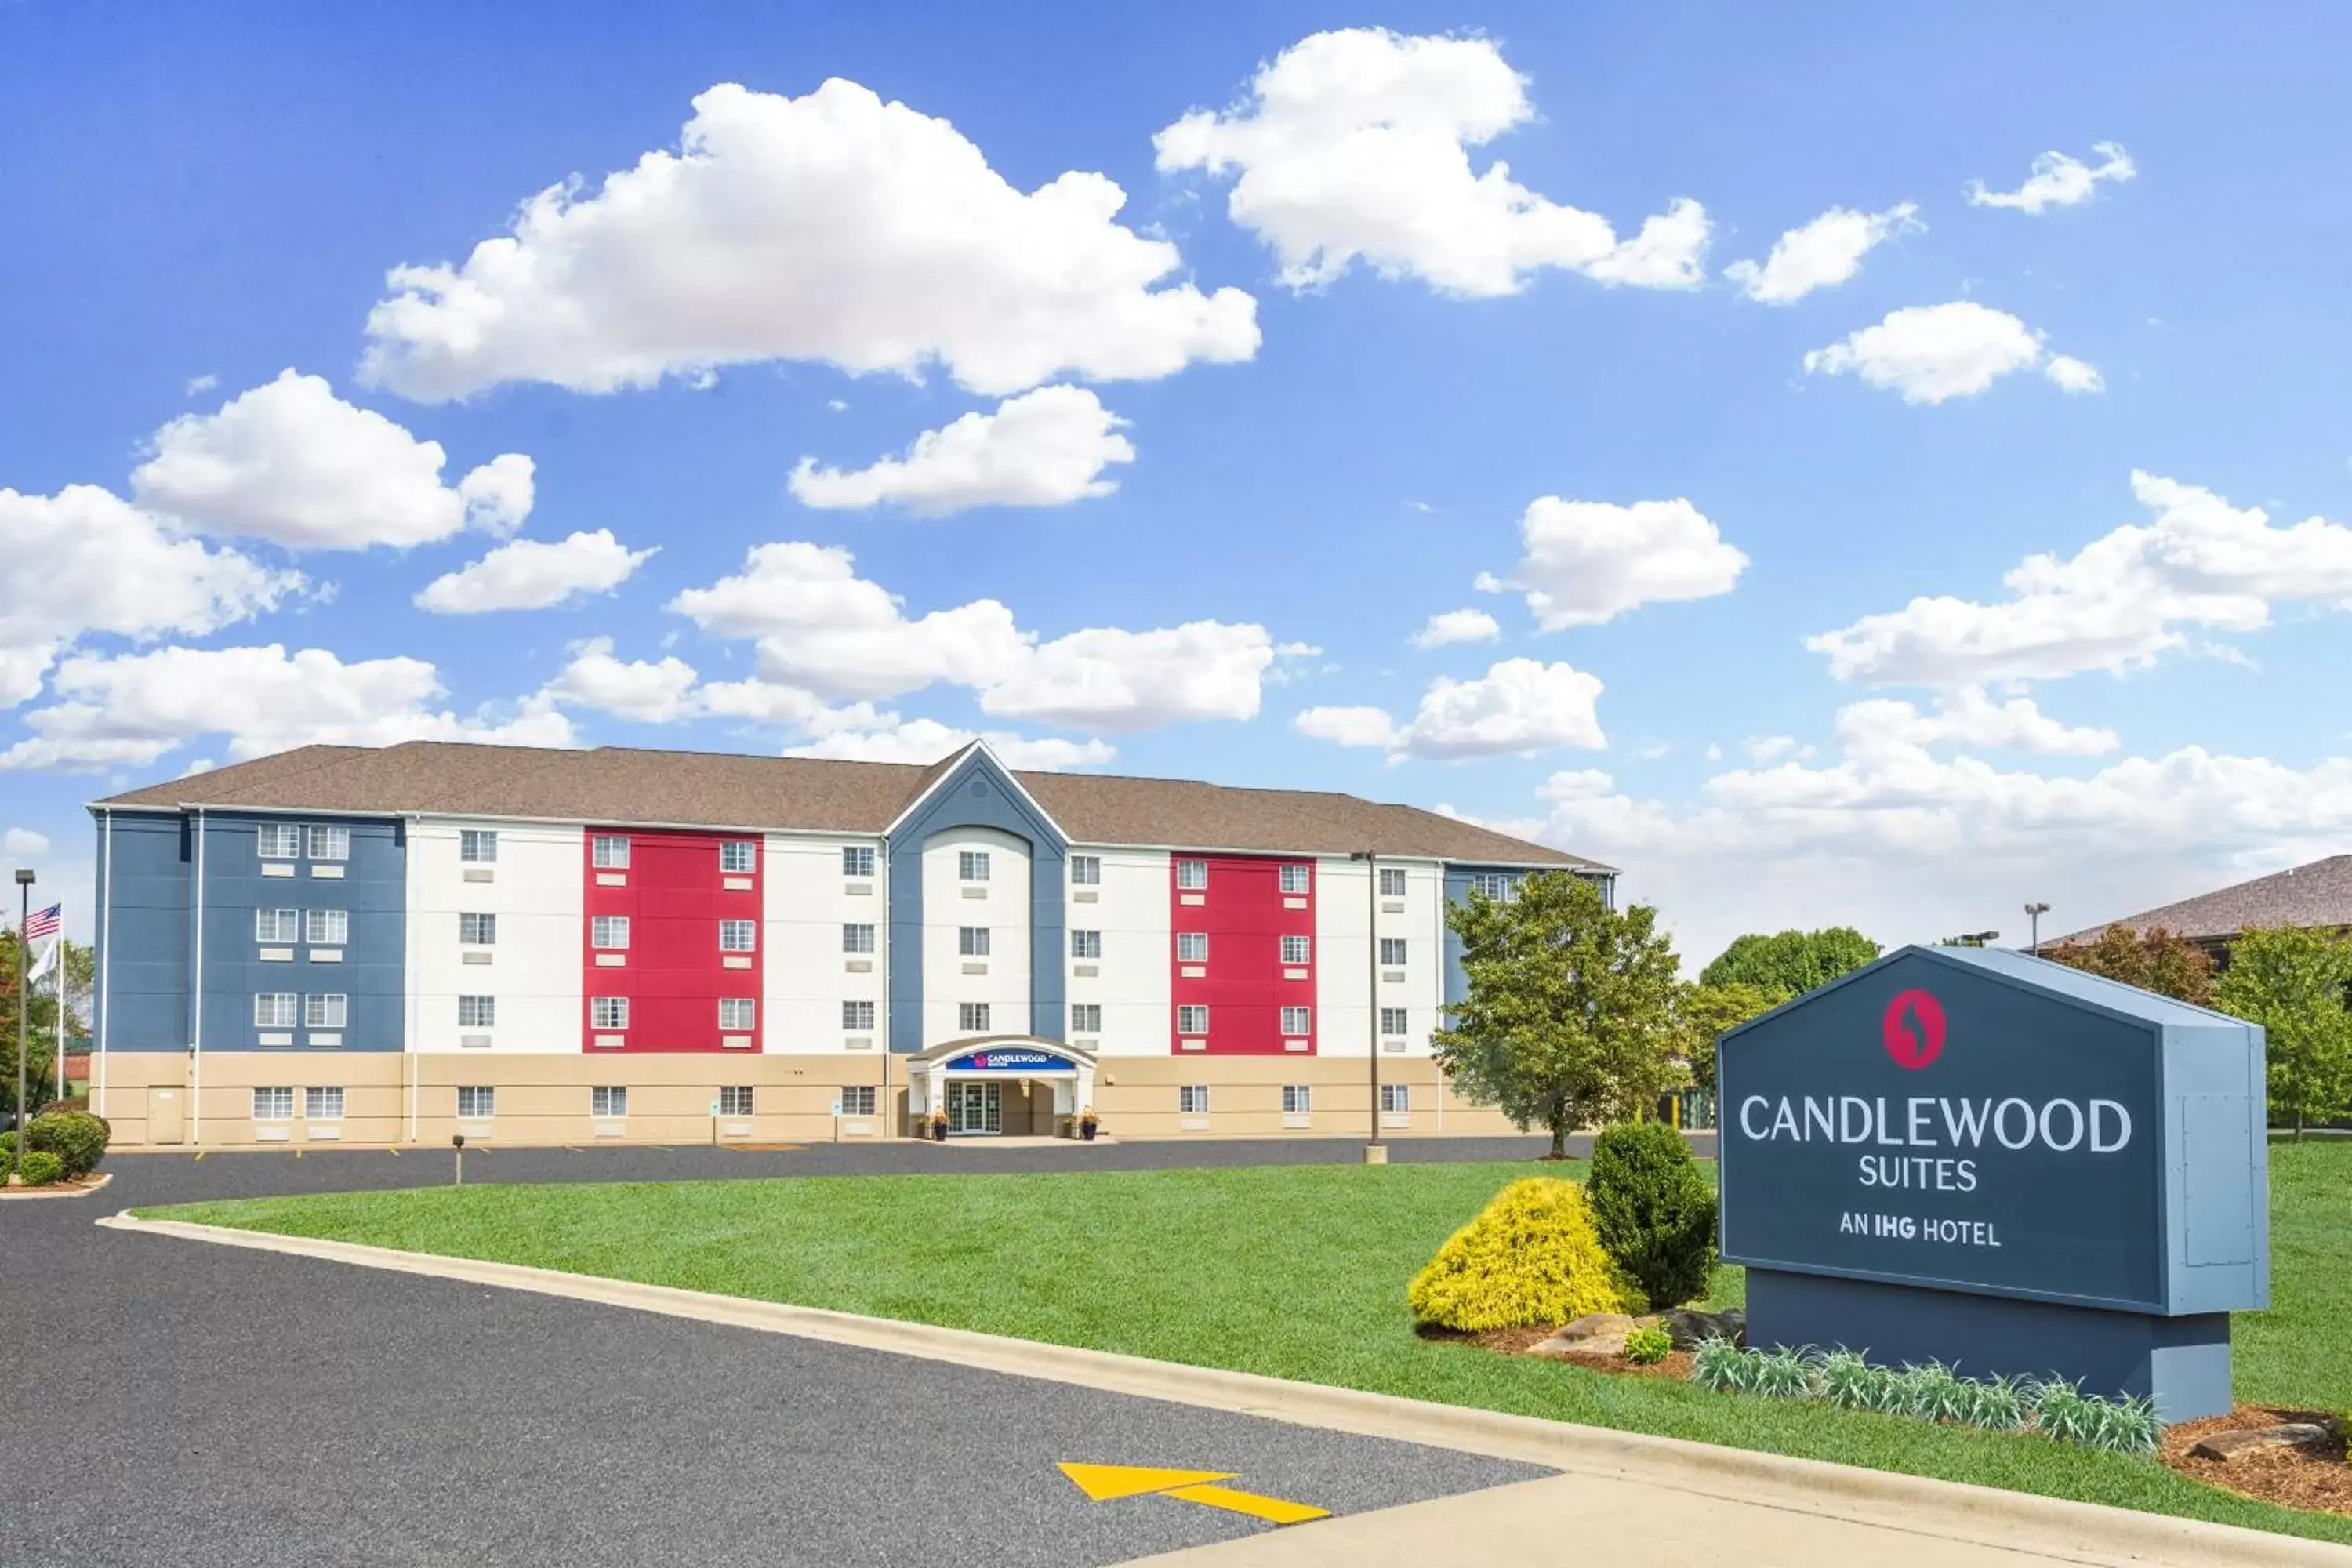 Property Building in Candlewood Suites Ofallon, Il - St. Louis Area, an IHG Hotel